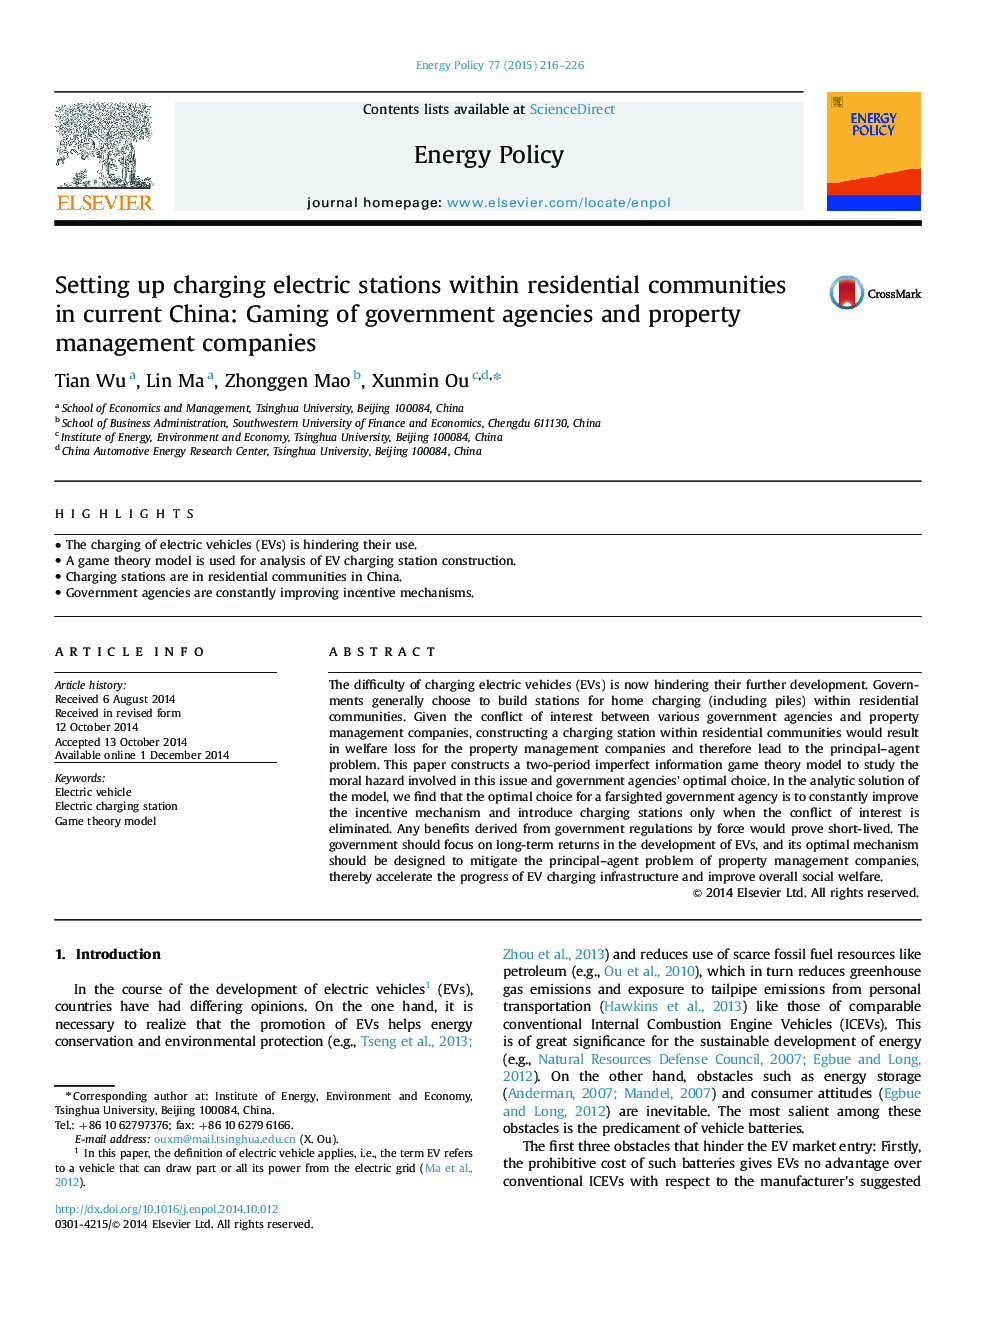 Setting up charging electric stations within residential communities in current China: Gaming of government agencies and property management companies